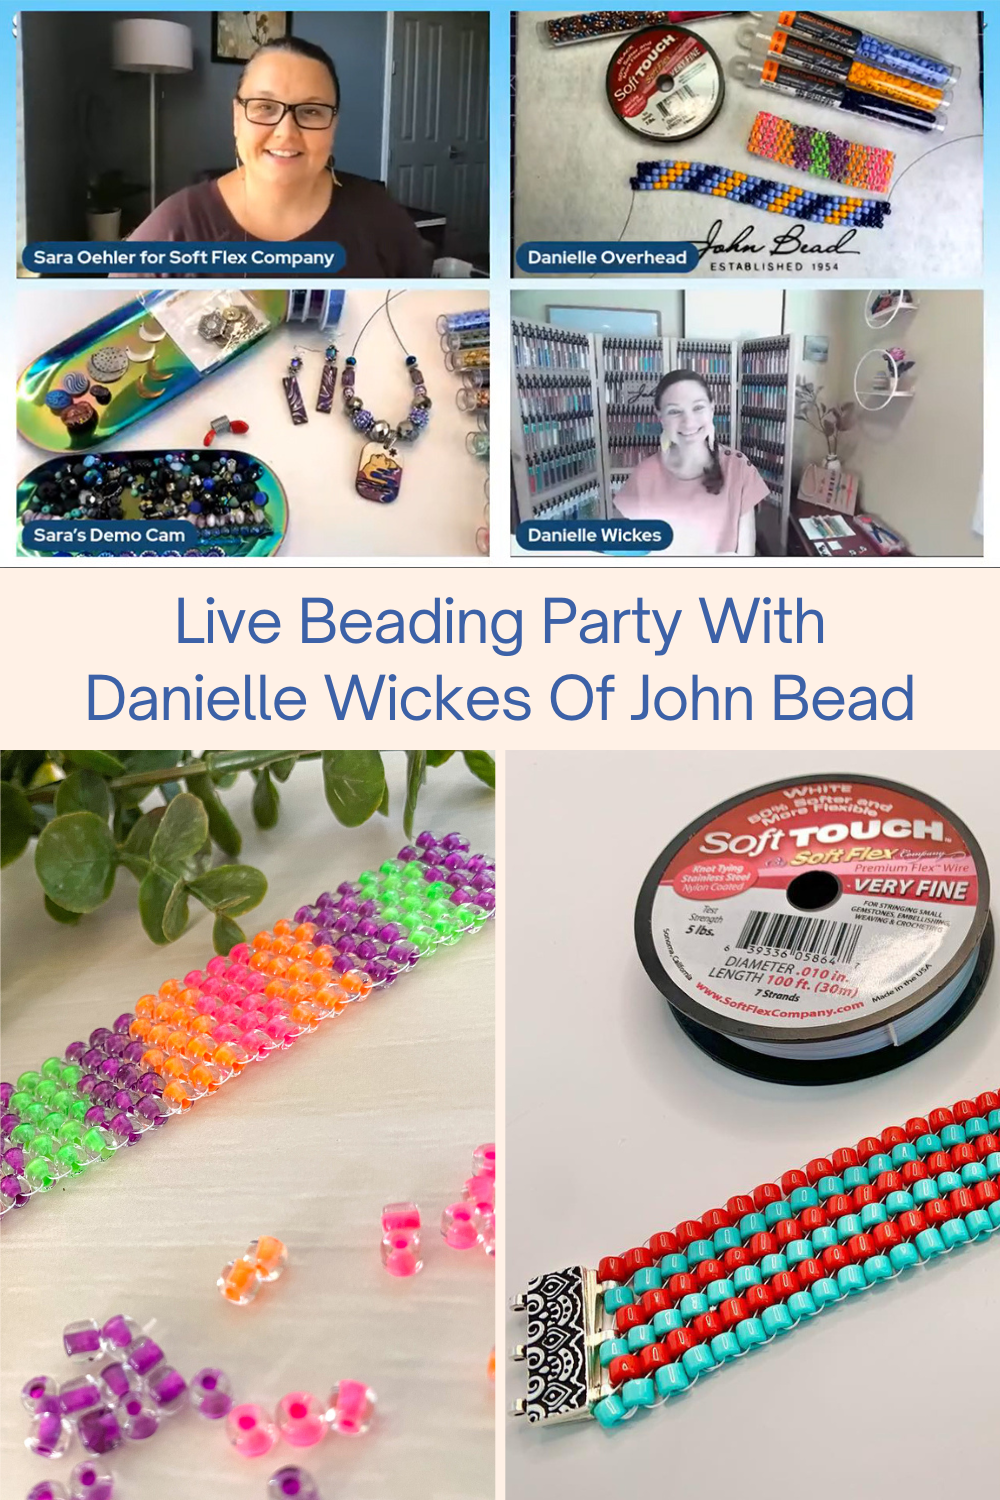 Live Beading Party With Danielle Wickes Of John Bead Collage